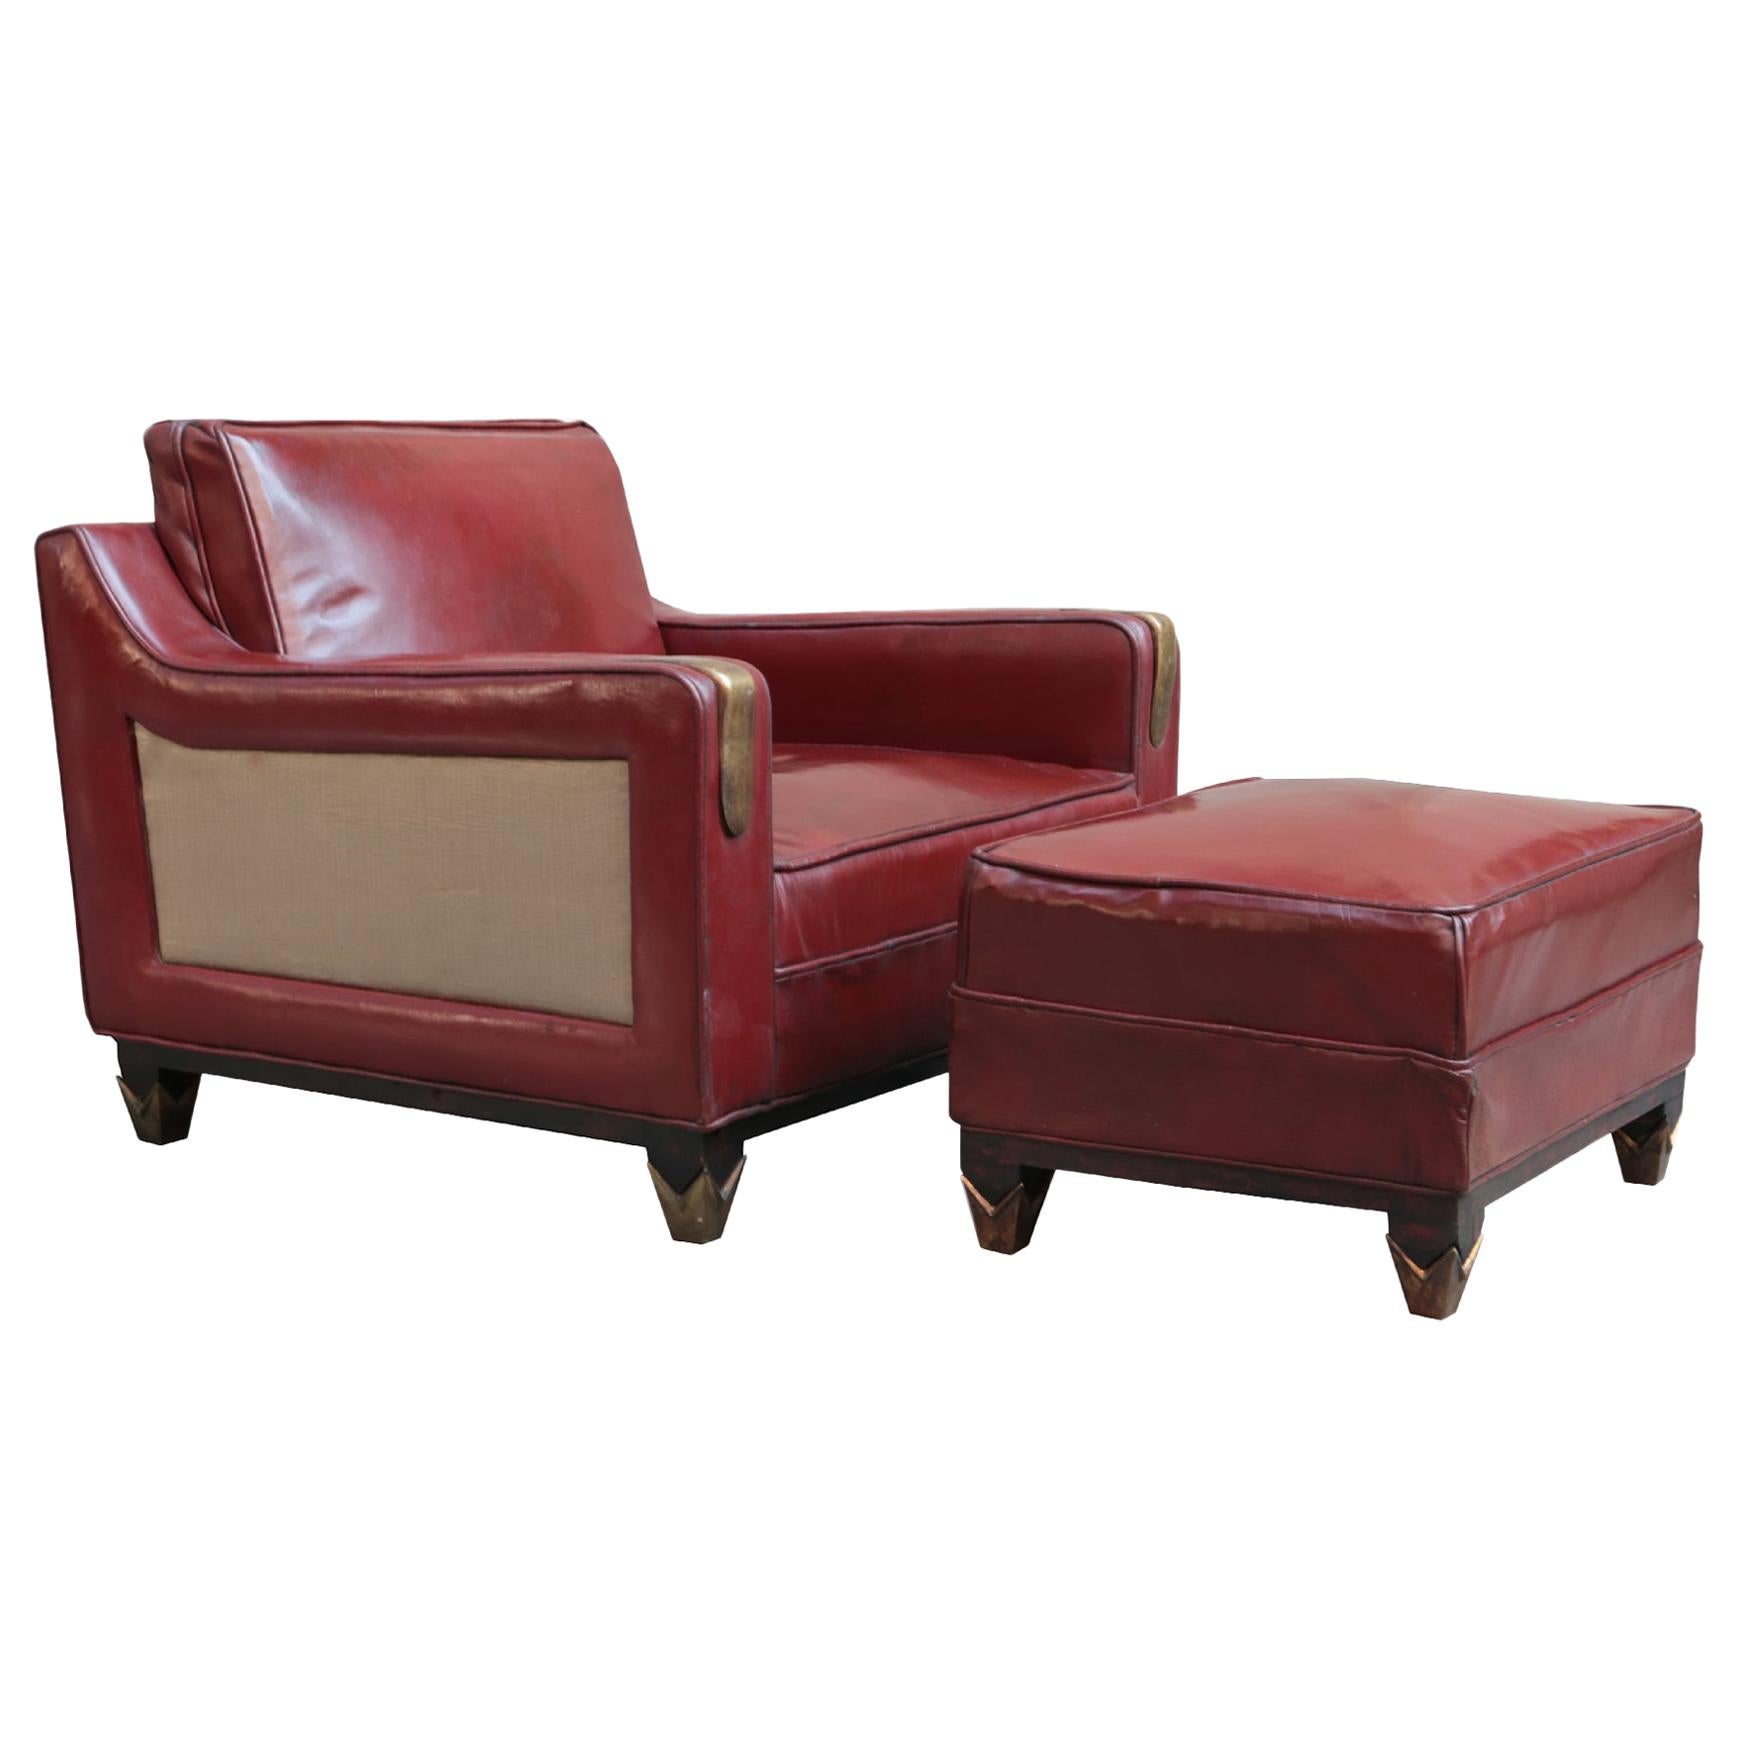 Mid-Century Modern Leather Club Chair with Matching Ottoman